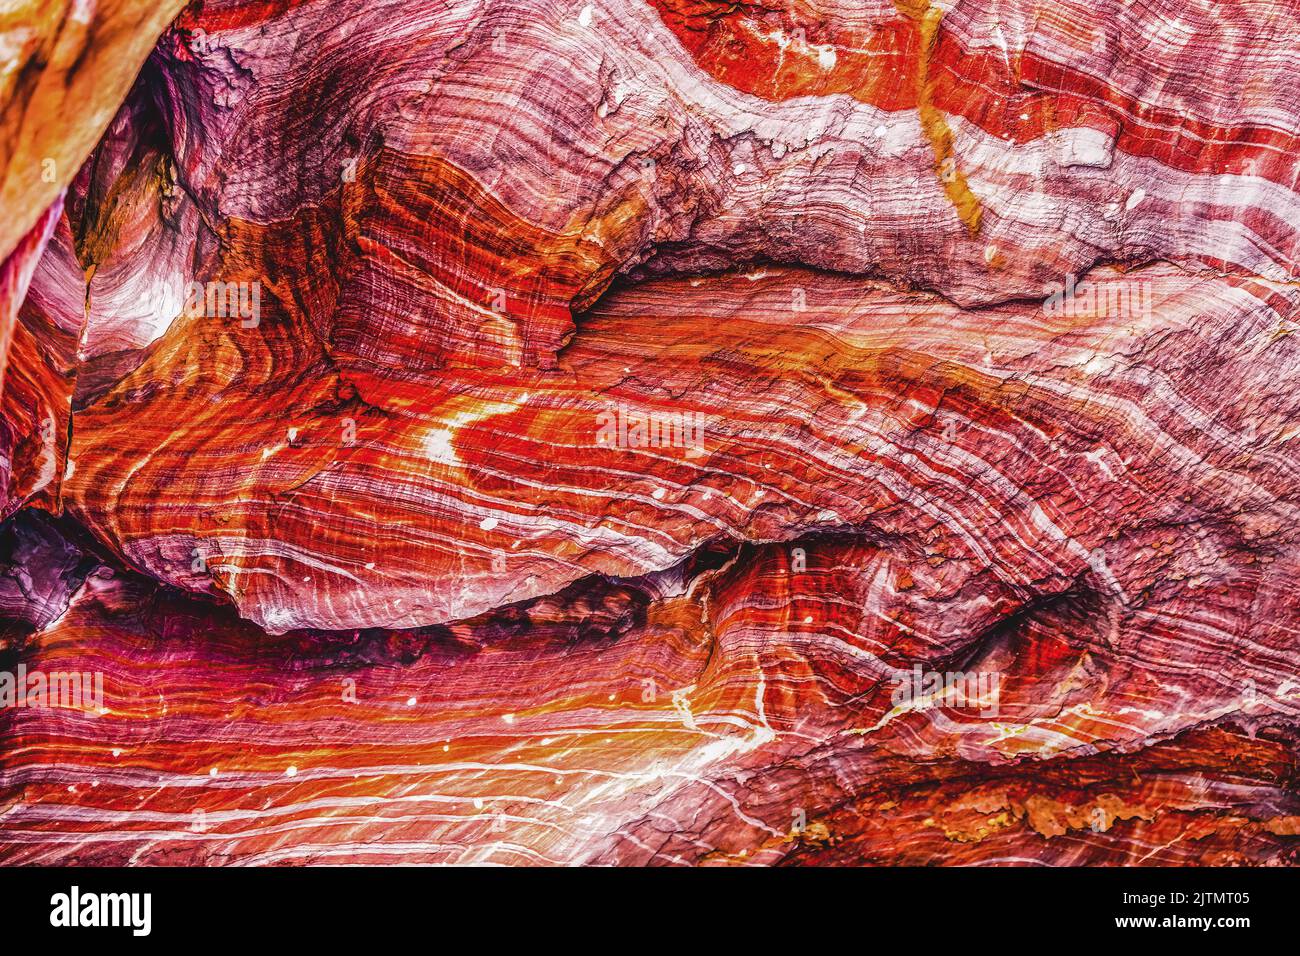 Red Rock Canyon Wall Abstract Petra Jordan Built by  Nabataens in 200 BC to 400 AD Canyon walls create many colorful abstracts close up Stock Photo